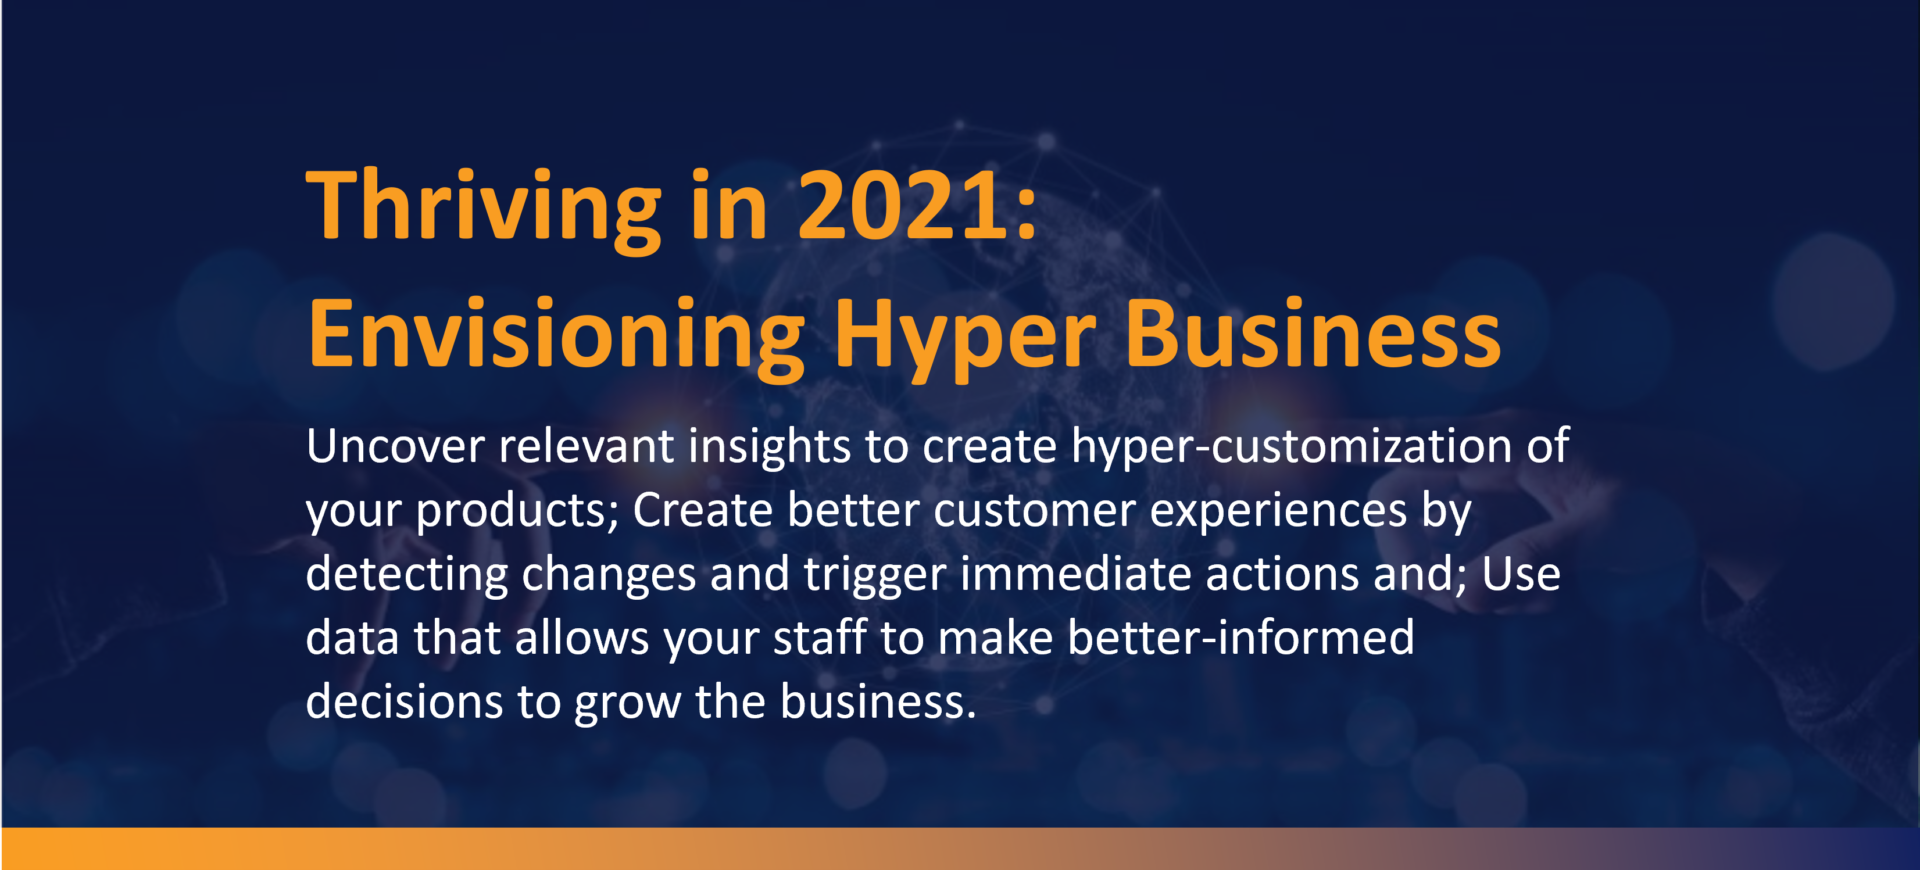 Thriving in 2021: Envisioning Hyper Business